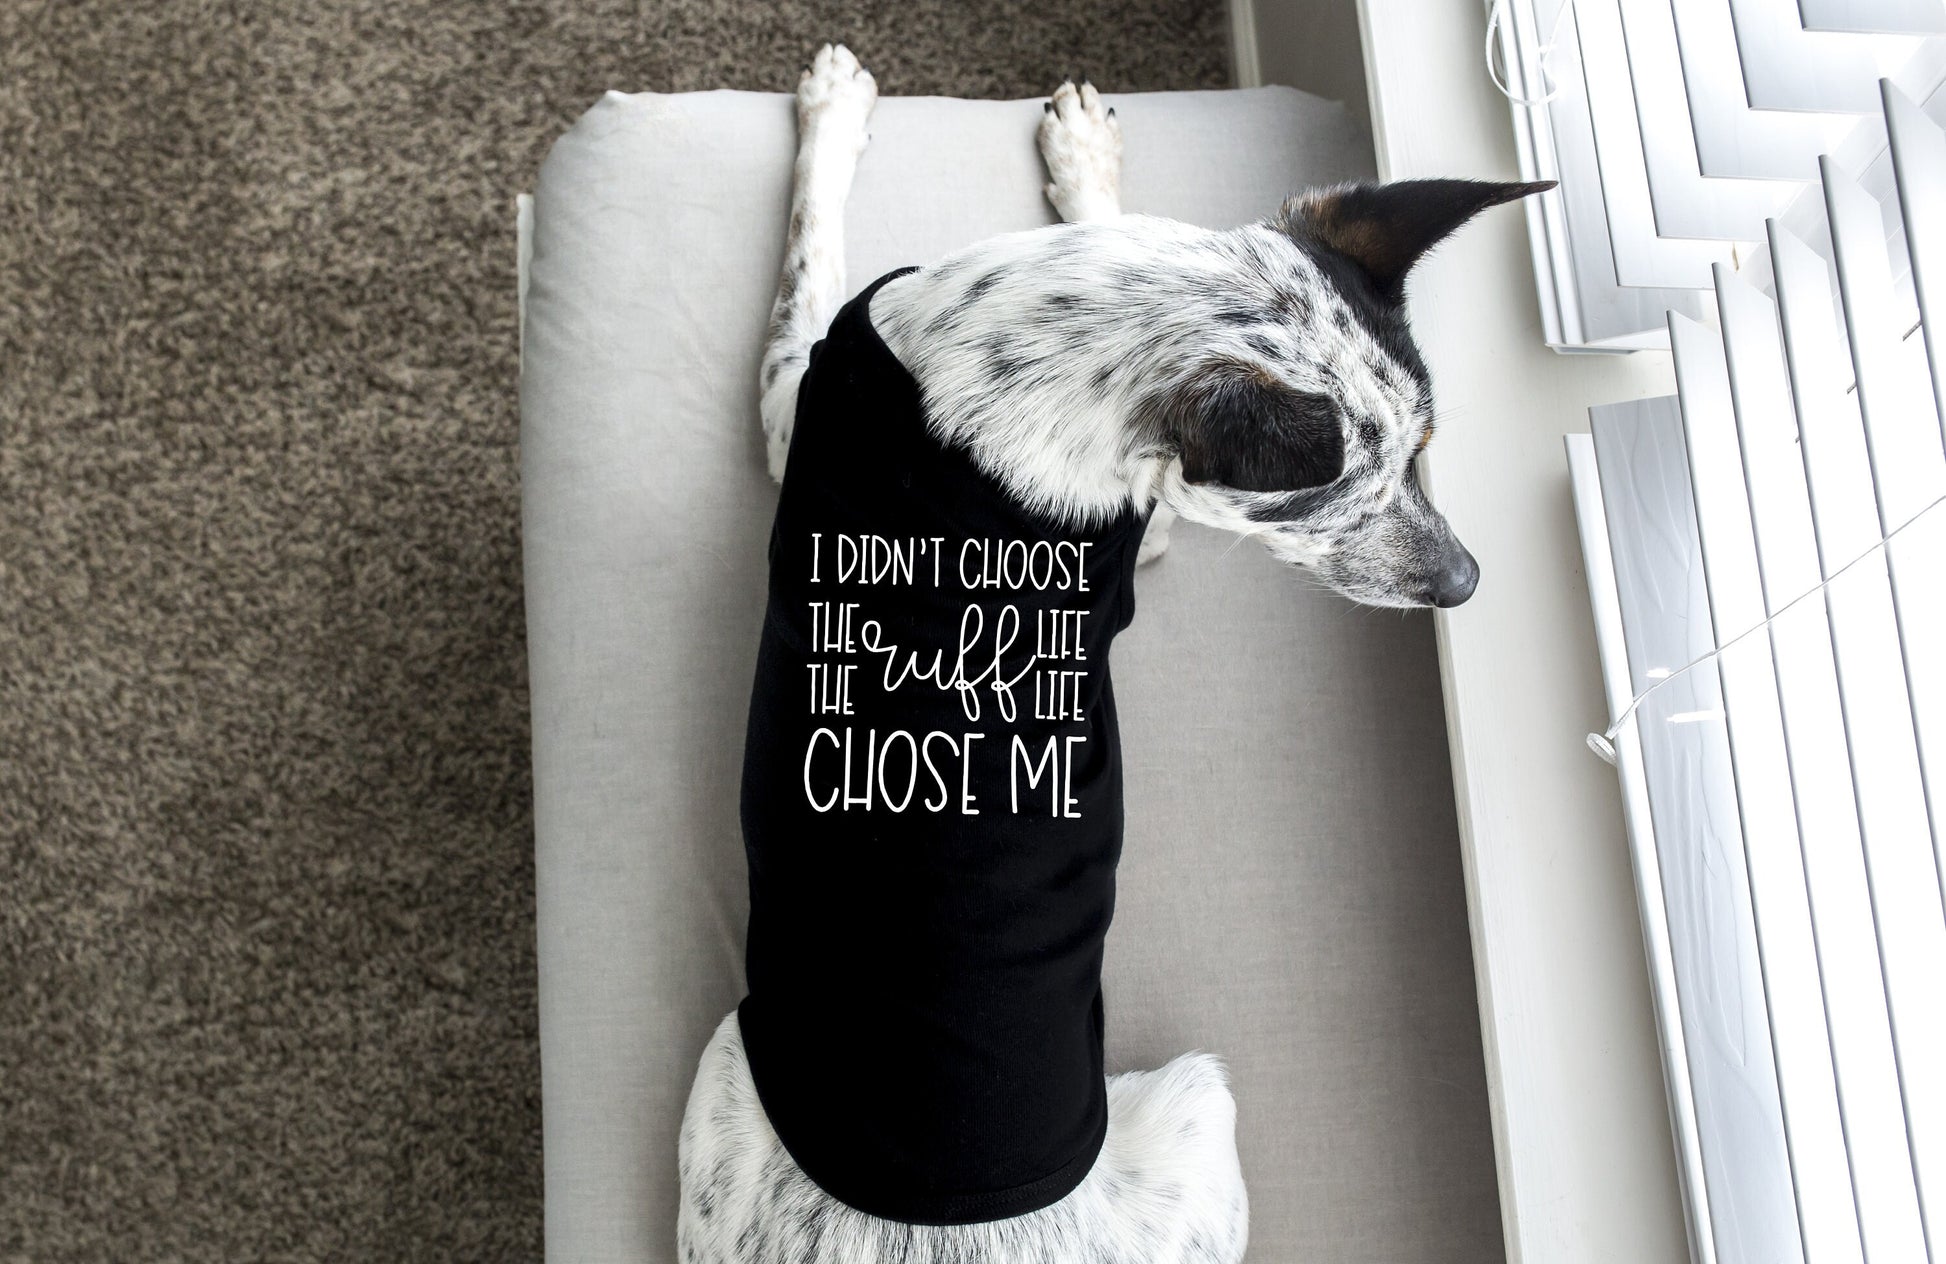 I Didn't Choose the Ruff Life the Ruff Life Chose Me Dog Tank Shirt - Sizes for any dog breed - shirt for dog - dog lover gift - dog clothes